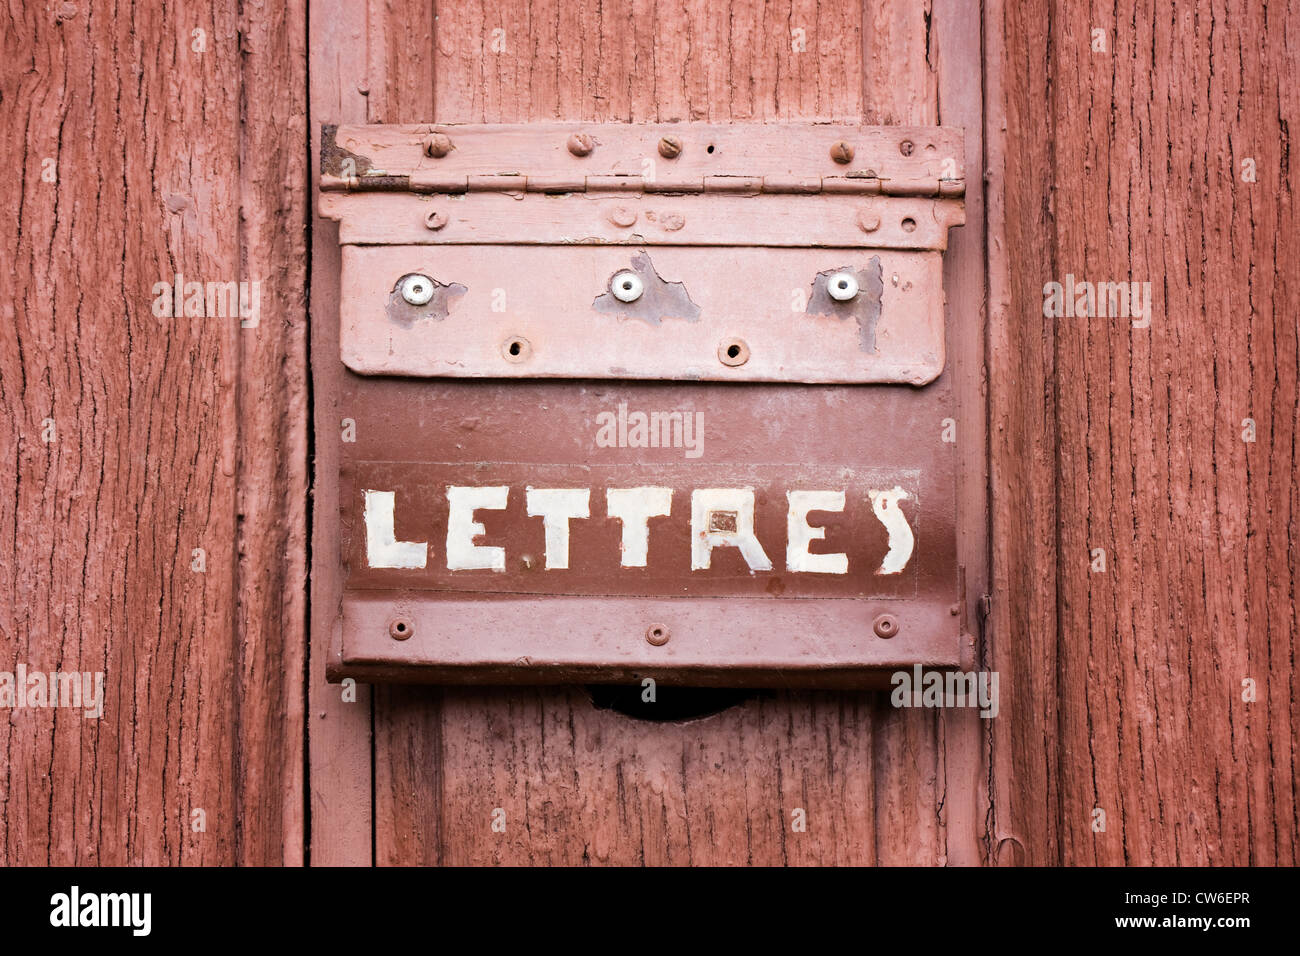 A letterbox in a wooden door, France. Stock Photo